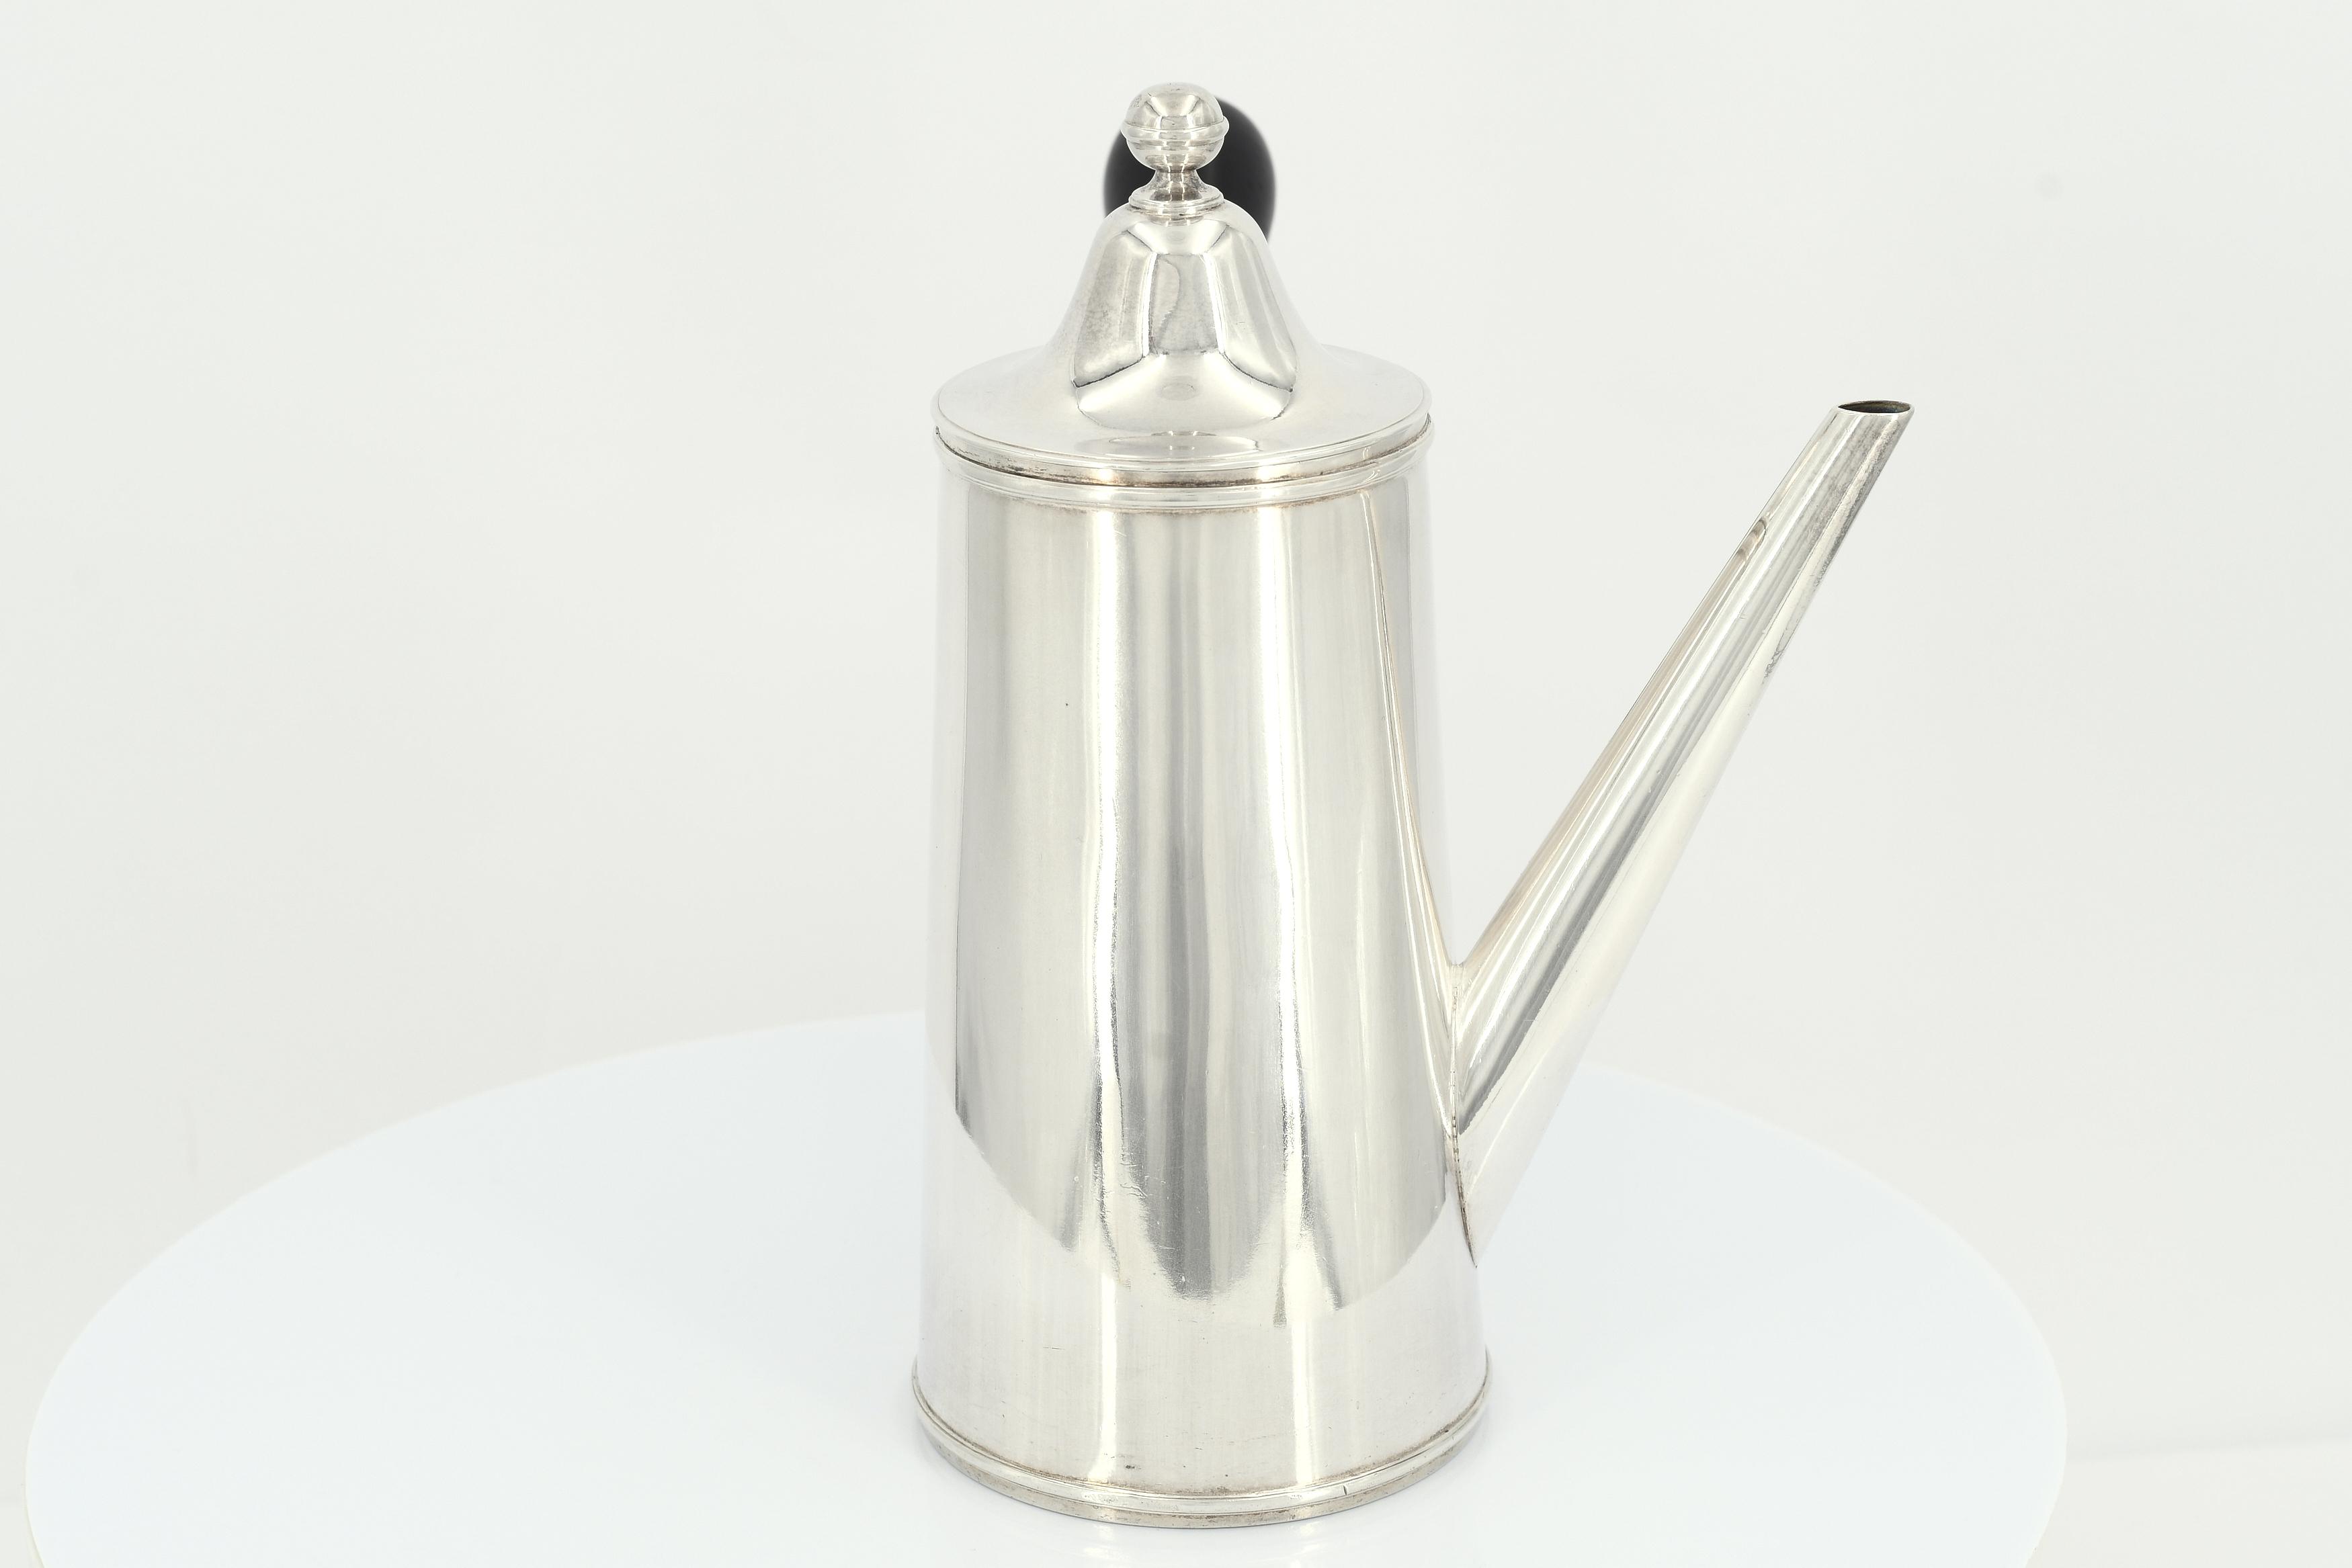 Silver coffee pot with side handle and sleek body - Image 5 of 7